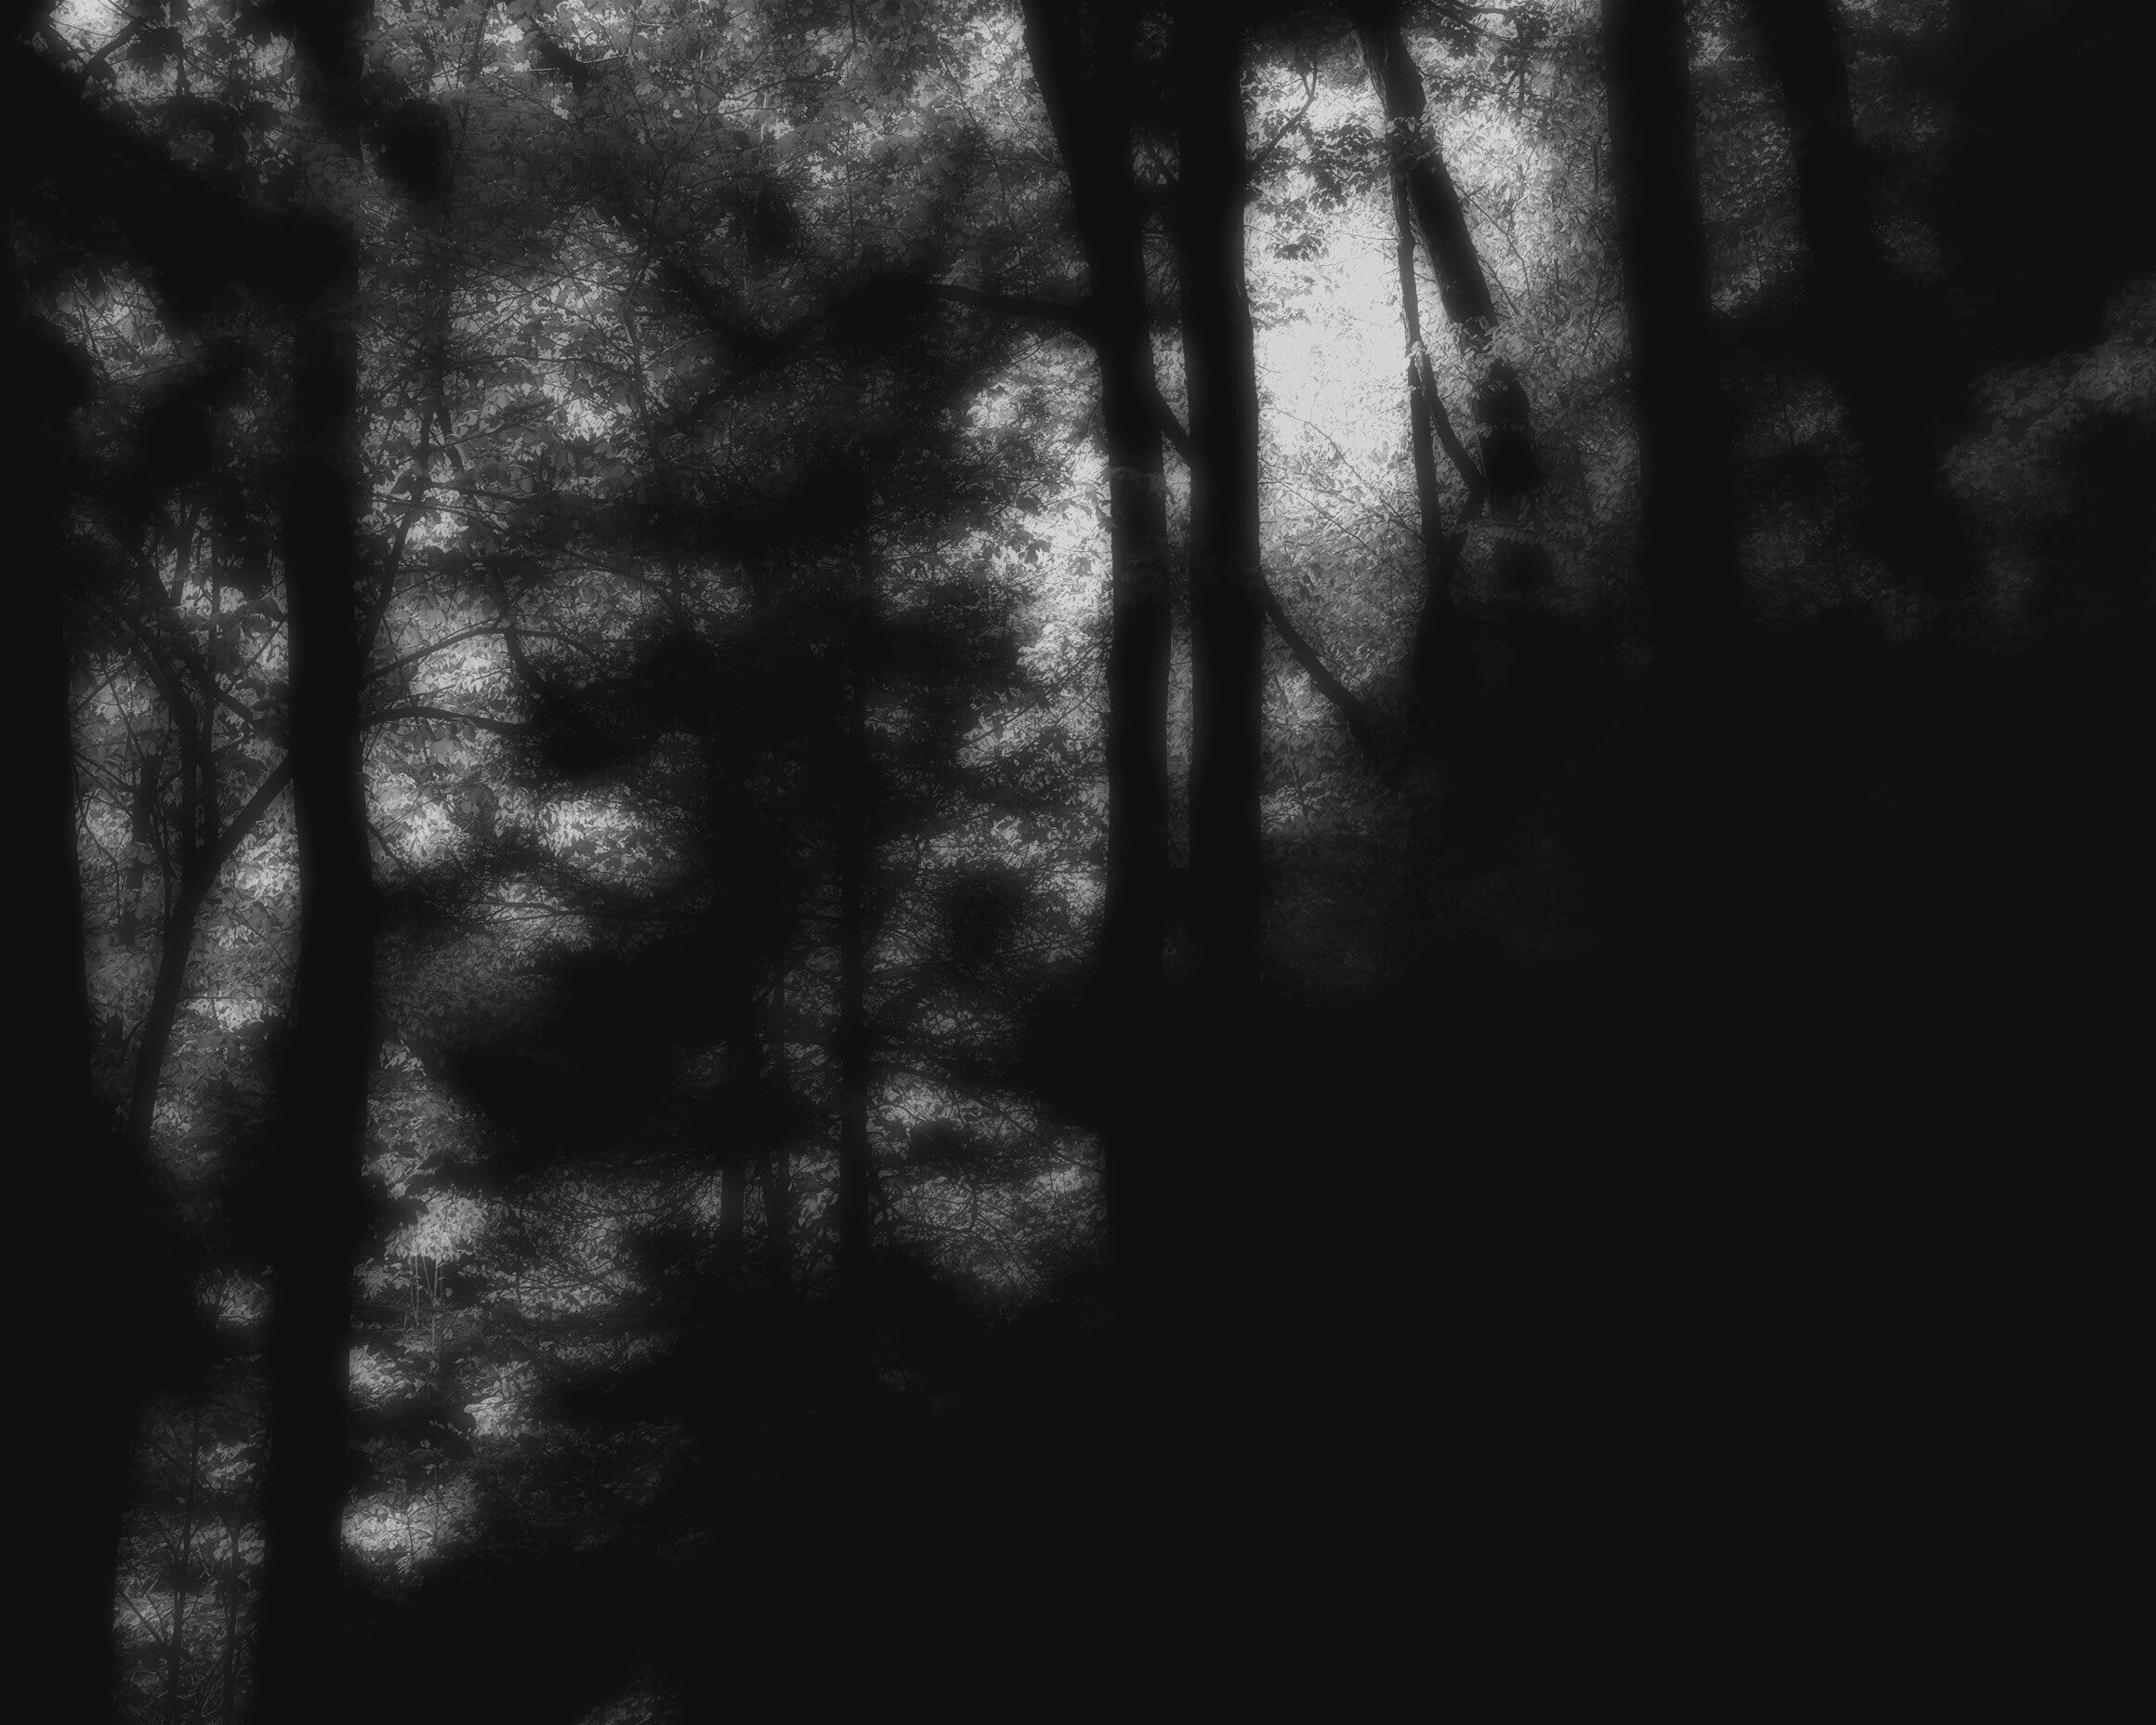 dark forest obscured in texture and stripped of colour